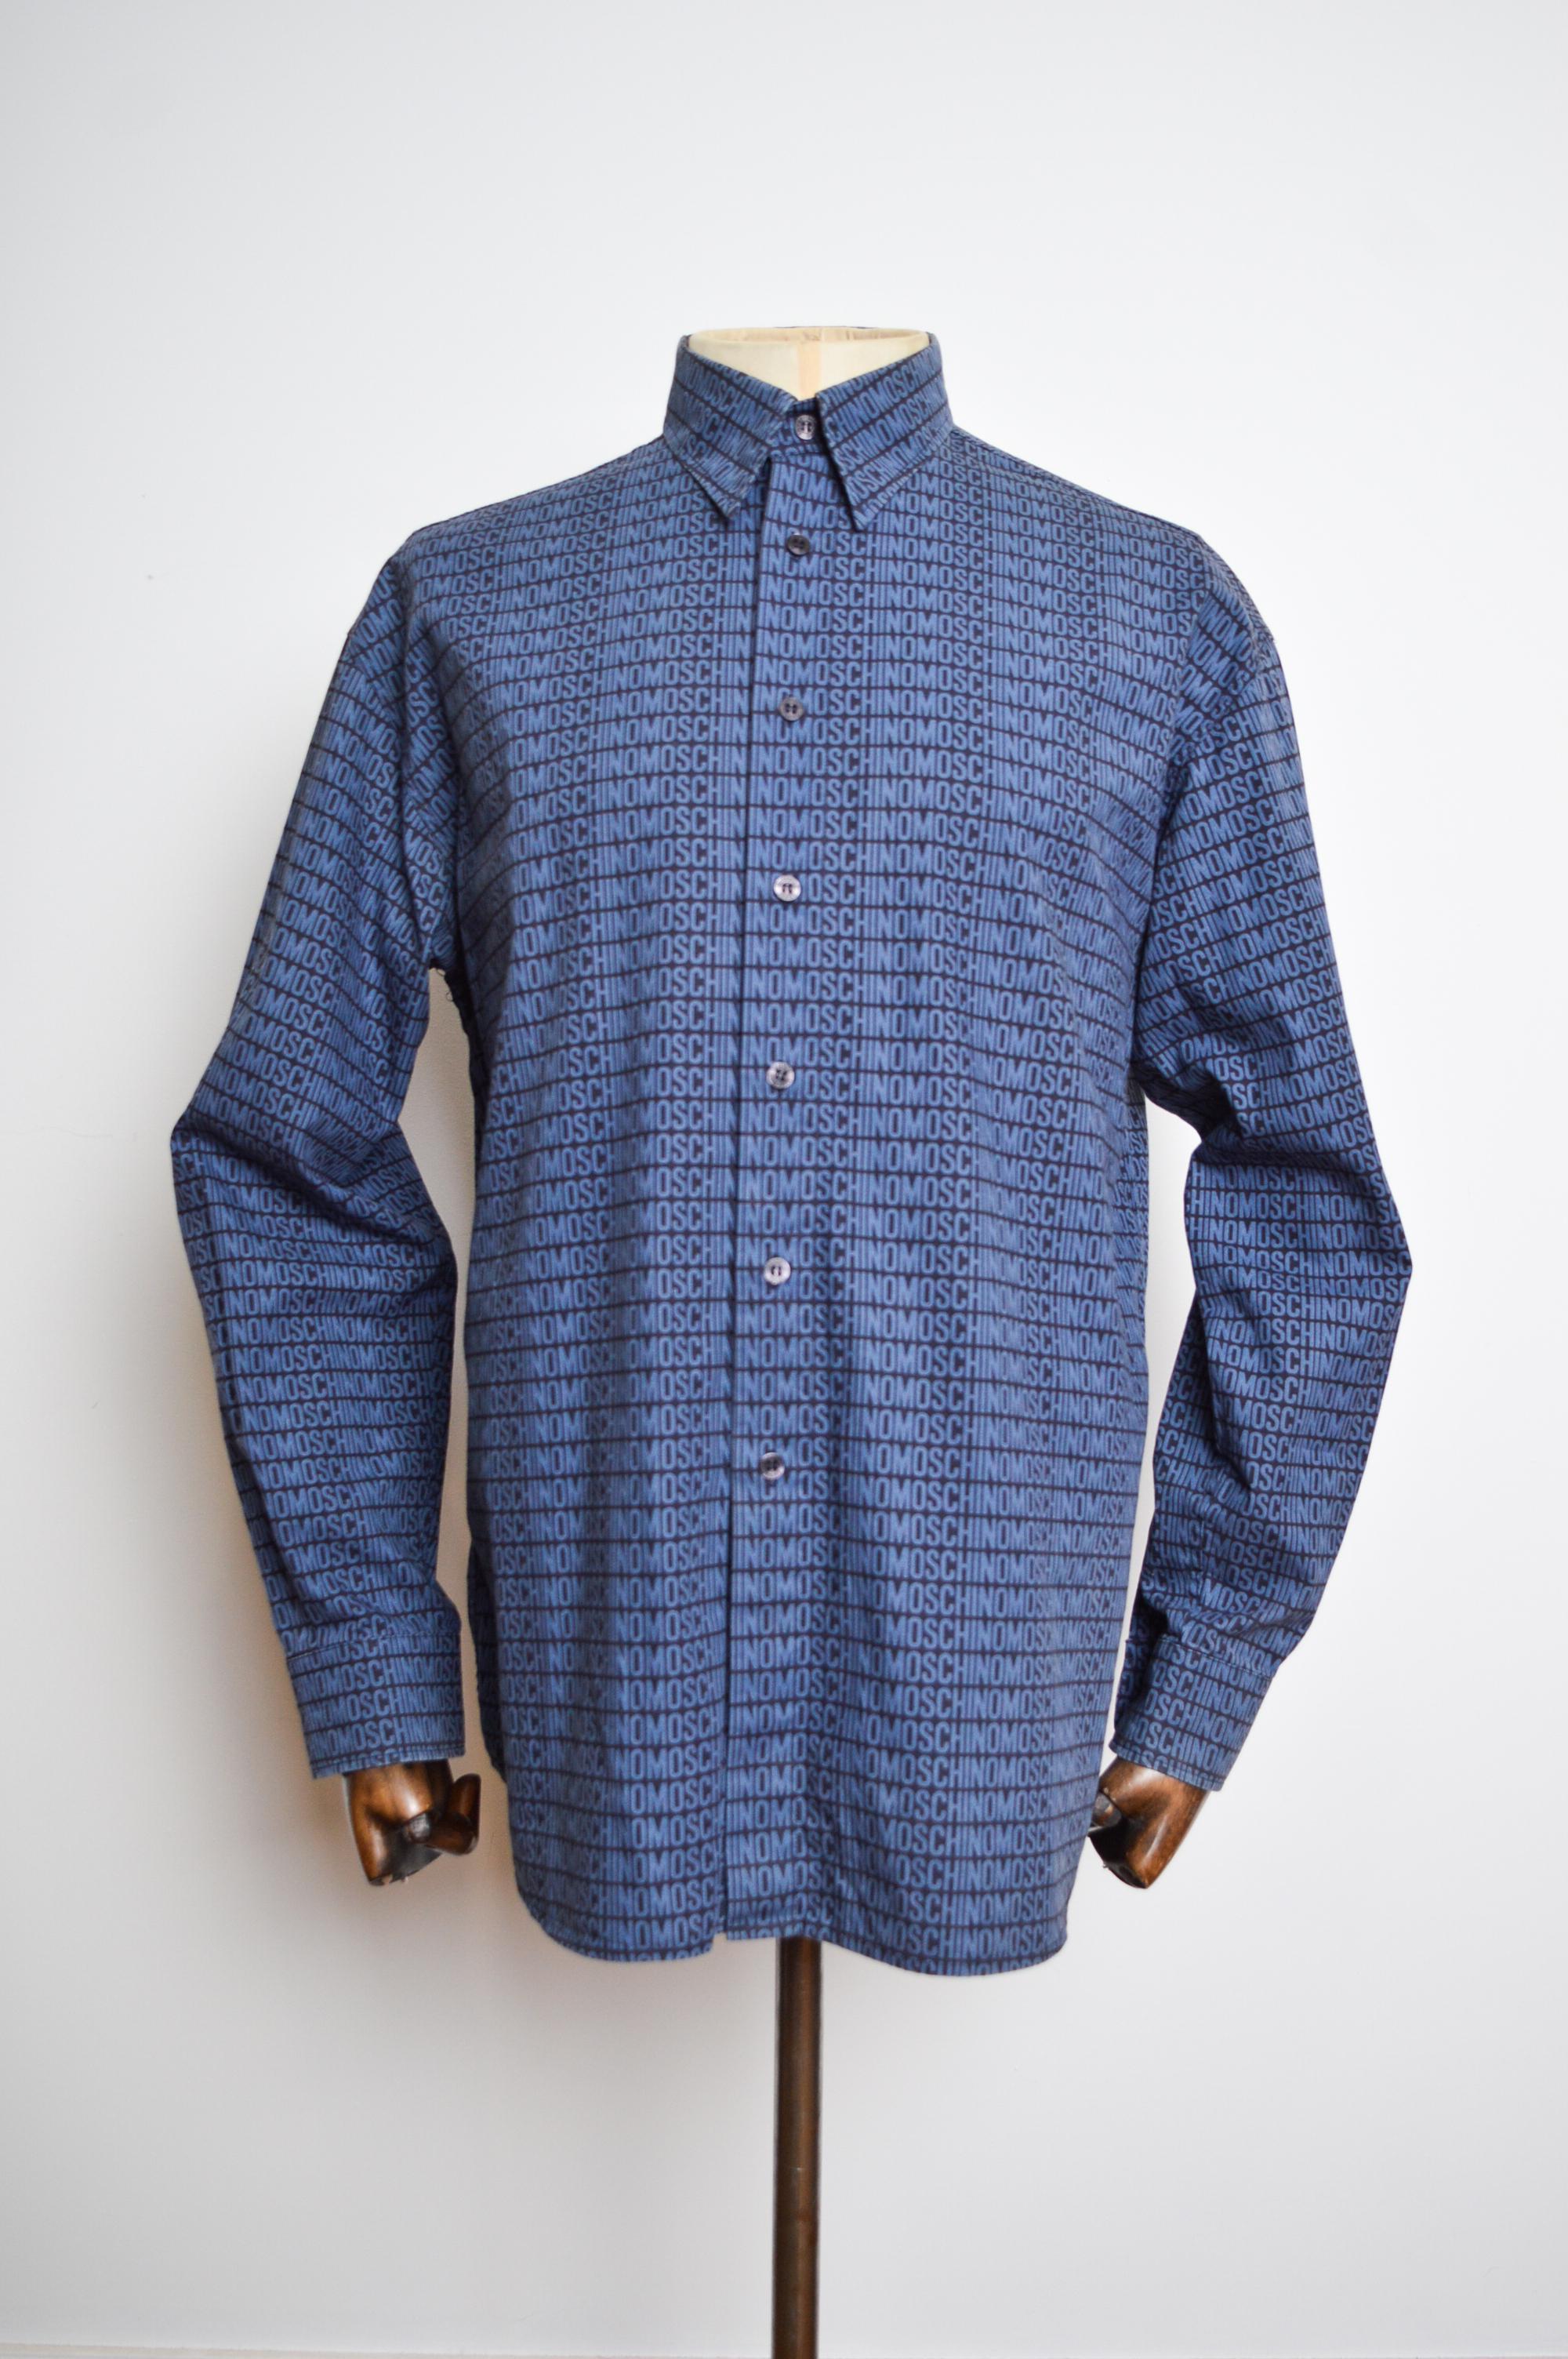 Early 2000's UK Garage Era 'MOSCHINO' repeat pattern Long sleeve Shirt, crafted from a printed cotton in mid Blue & Deep Navy shades.

MADE IN ITALY.   

Features: button down front , Collar, Long sleeves, cuffs, embossed ' Moschino' Buttons.  